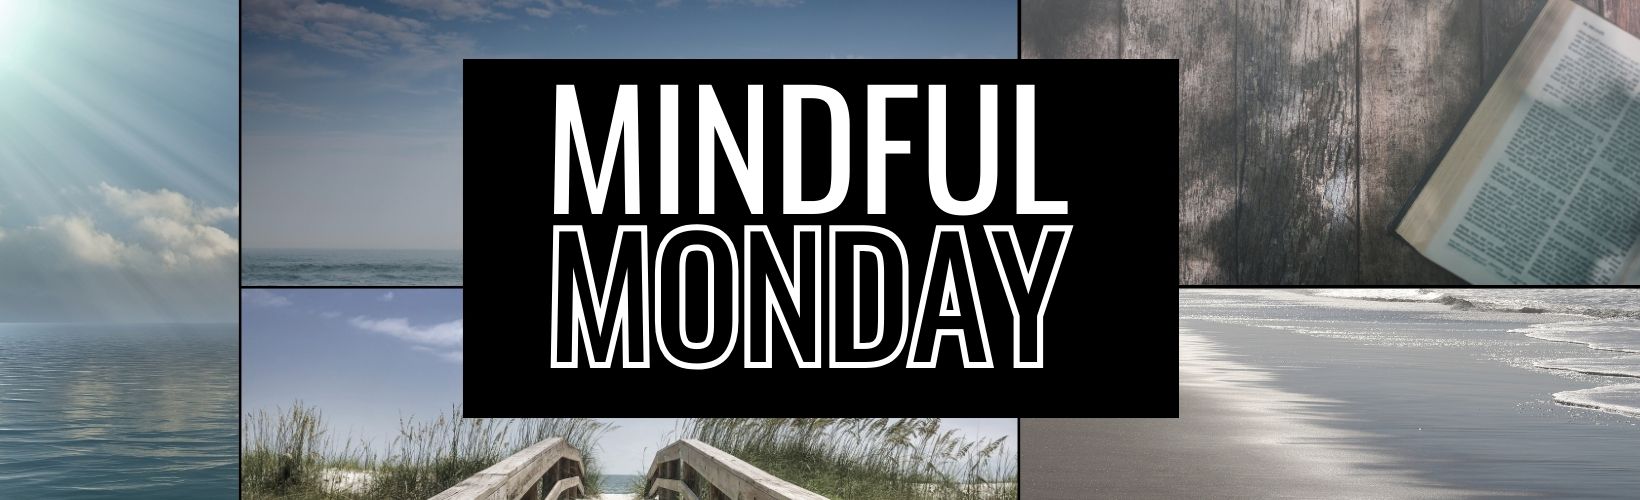 Mindful Monday: Overcoming Envy